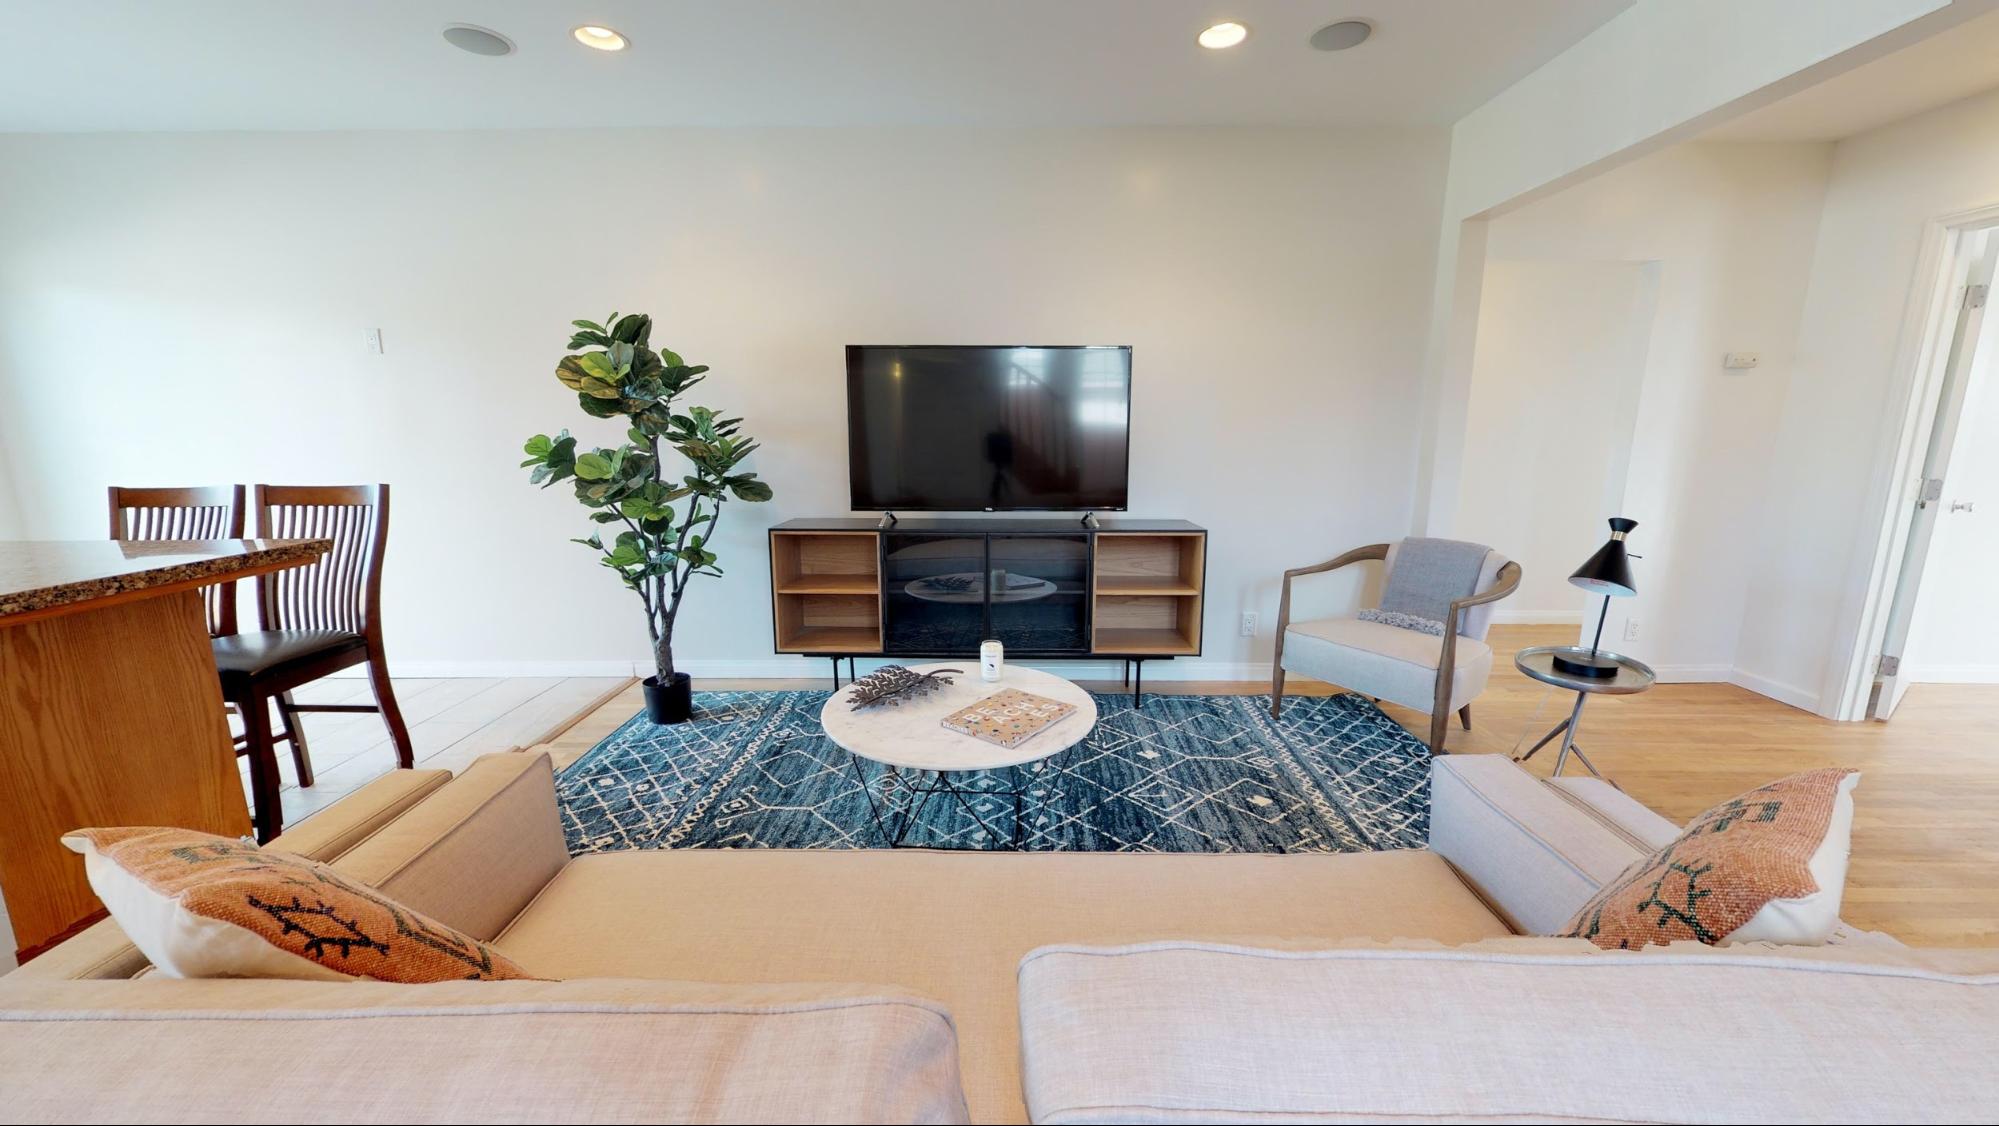 One Bedroom Apartments In Glendale